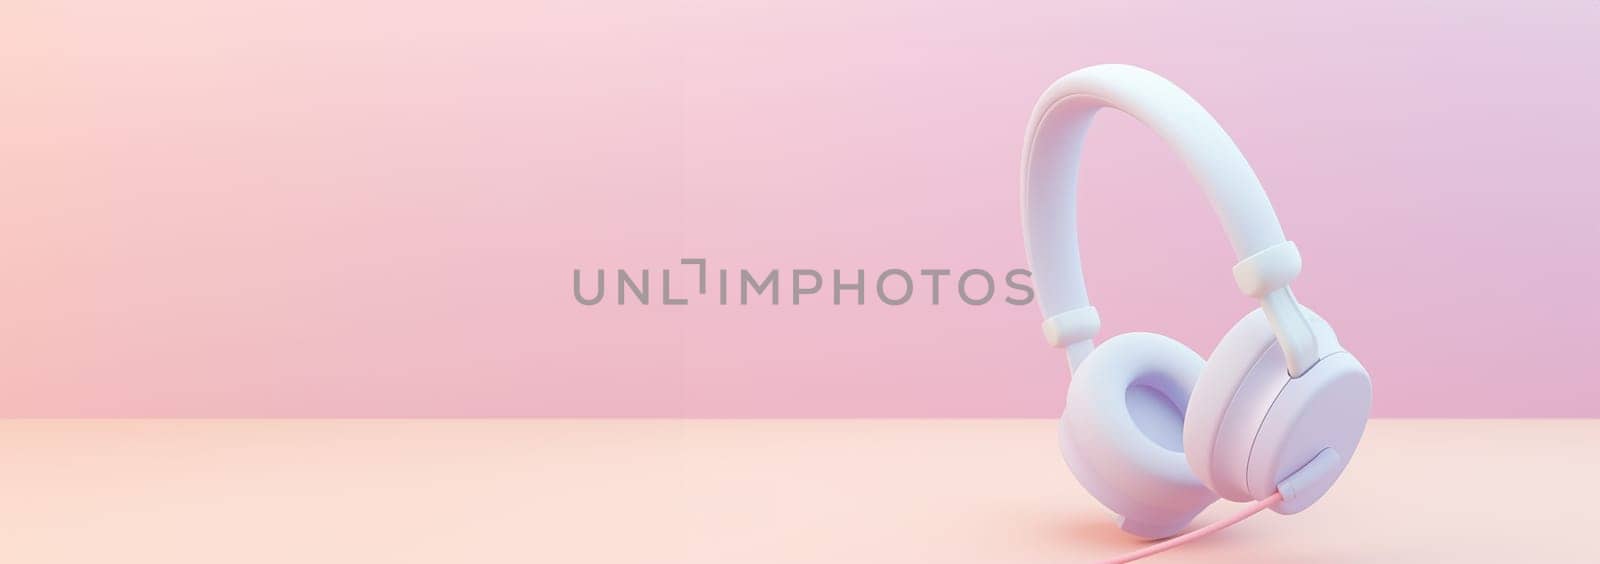 Banner Realistic wireless earphones of trendy color.3d pastel colored background headphone element. Realistic object for music or game concept, poster design, flyer, website. Music audio headphones Copy space by Annebel146